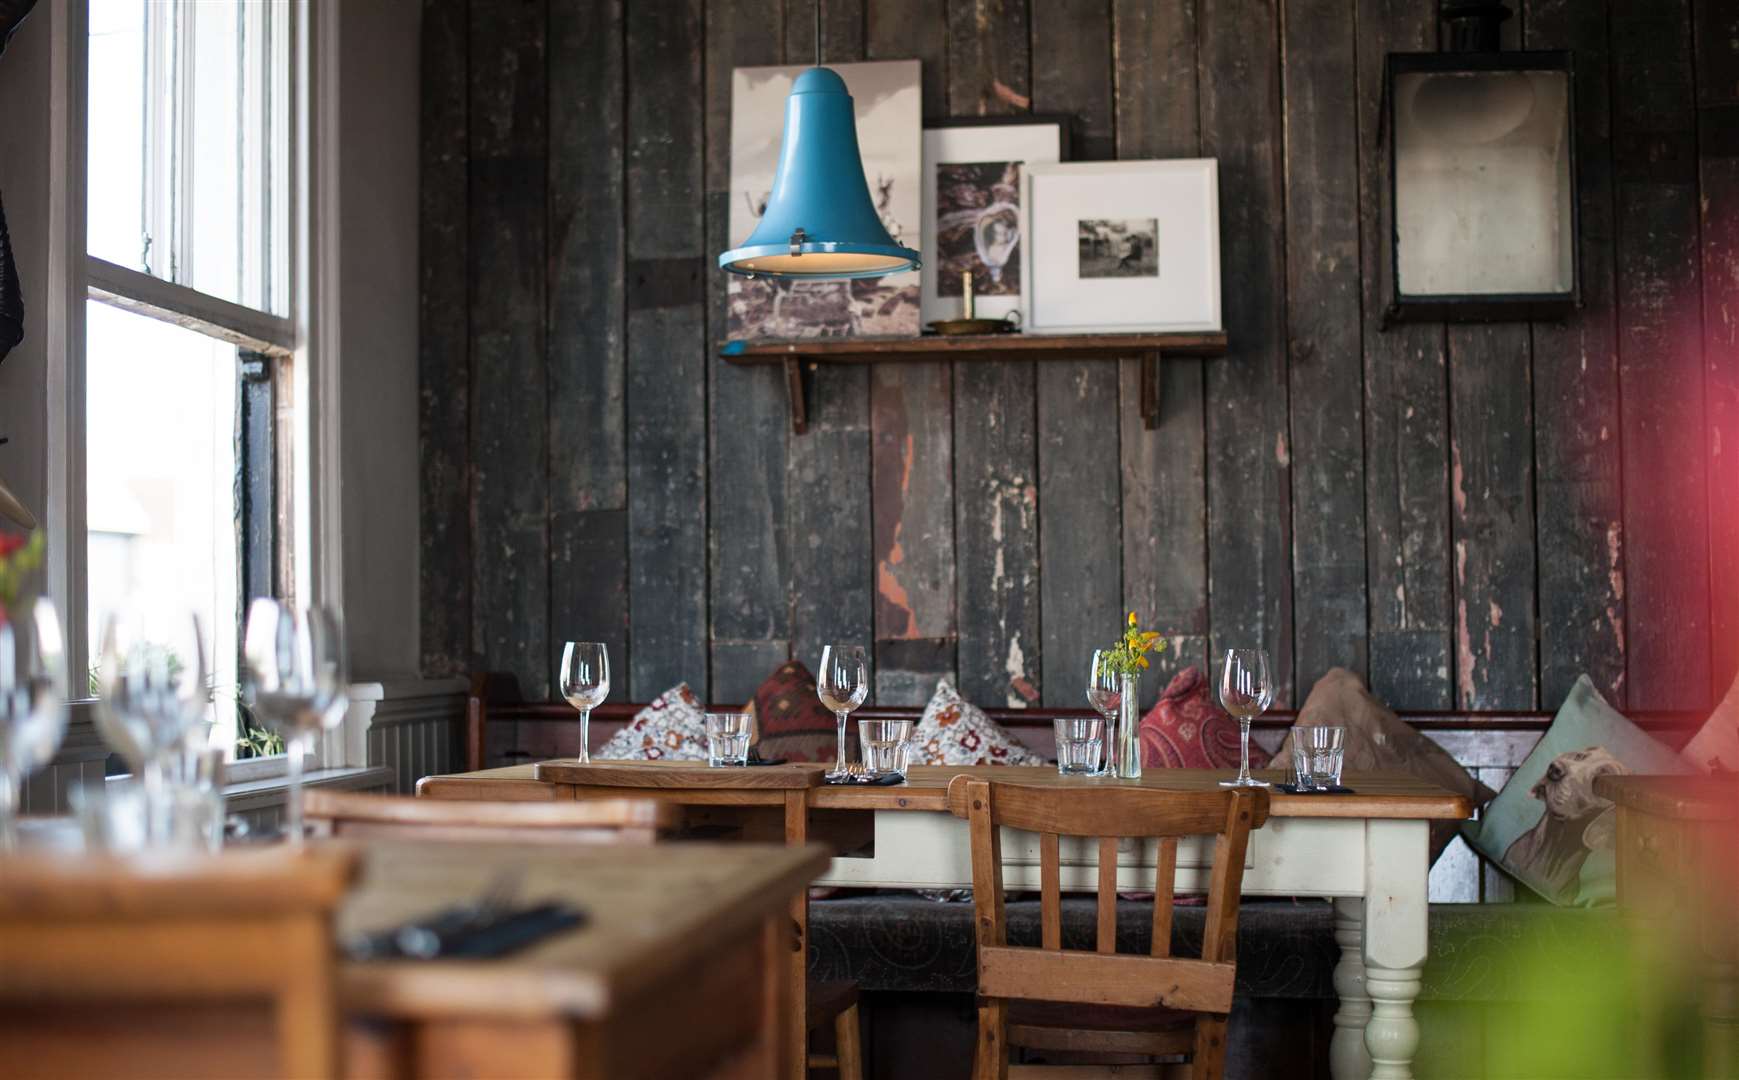 Pearson's Arms in Whitstable has launched a vegan menu this month